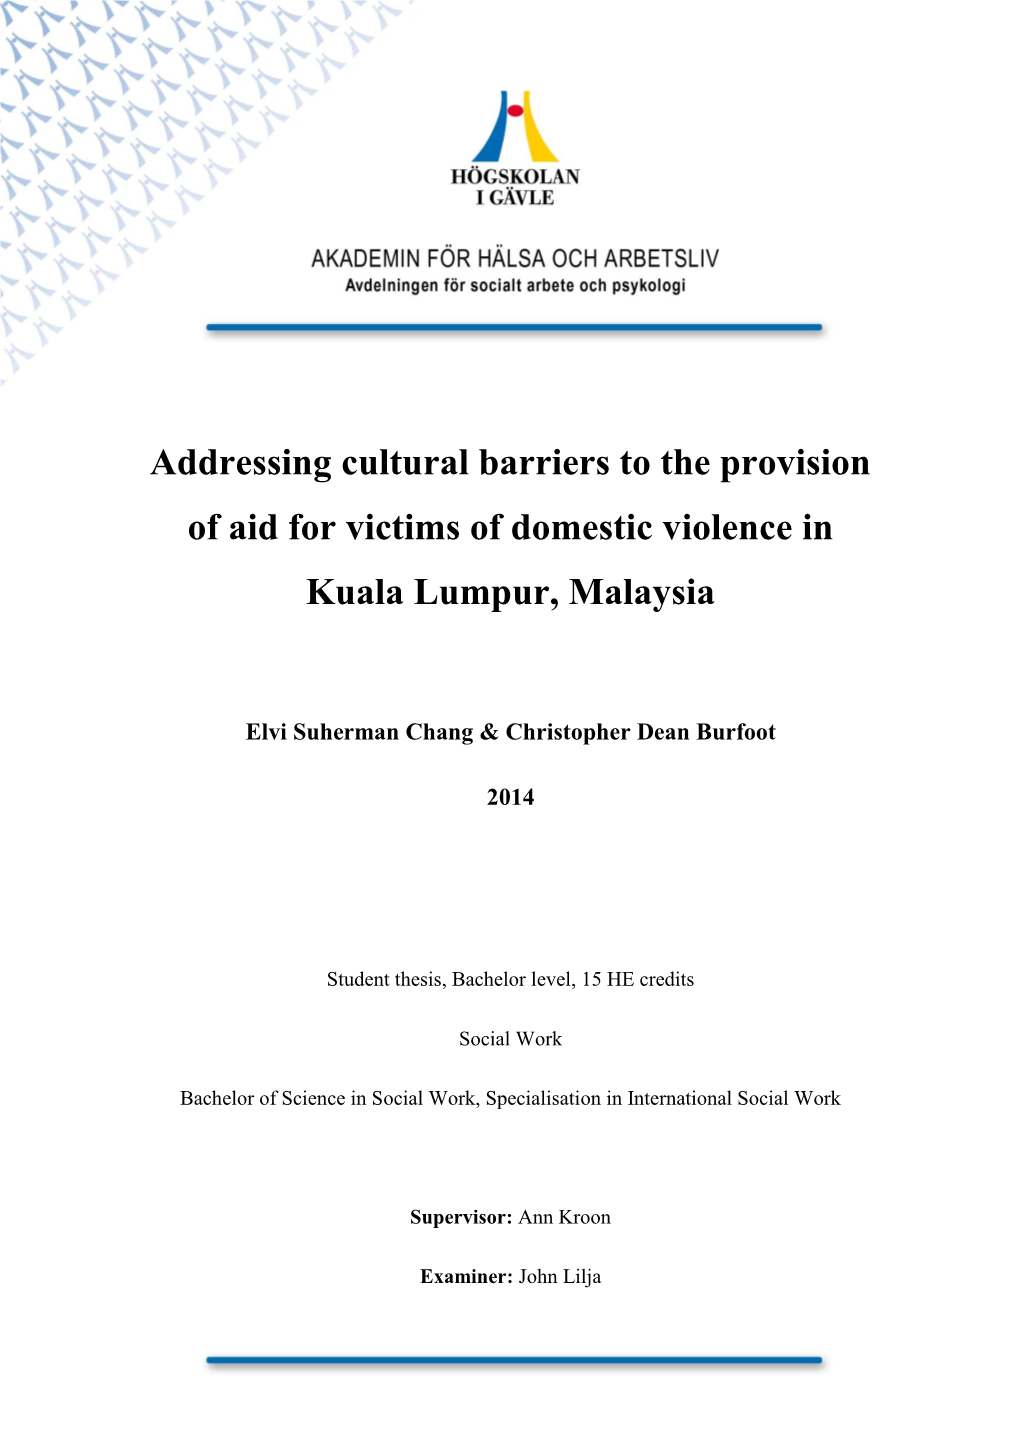 Addressing Cultural Barriers to the Provision of Aid for Victims of Domestic Violence in Kuala Lumpur, Malaysia